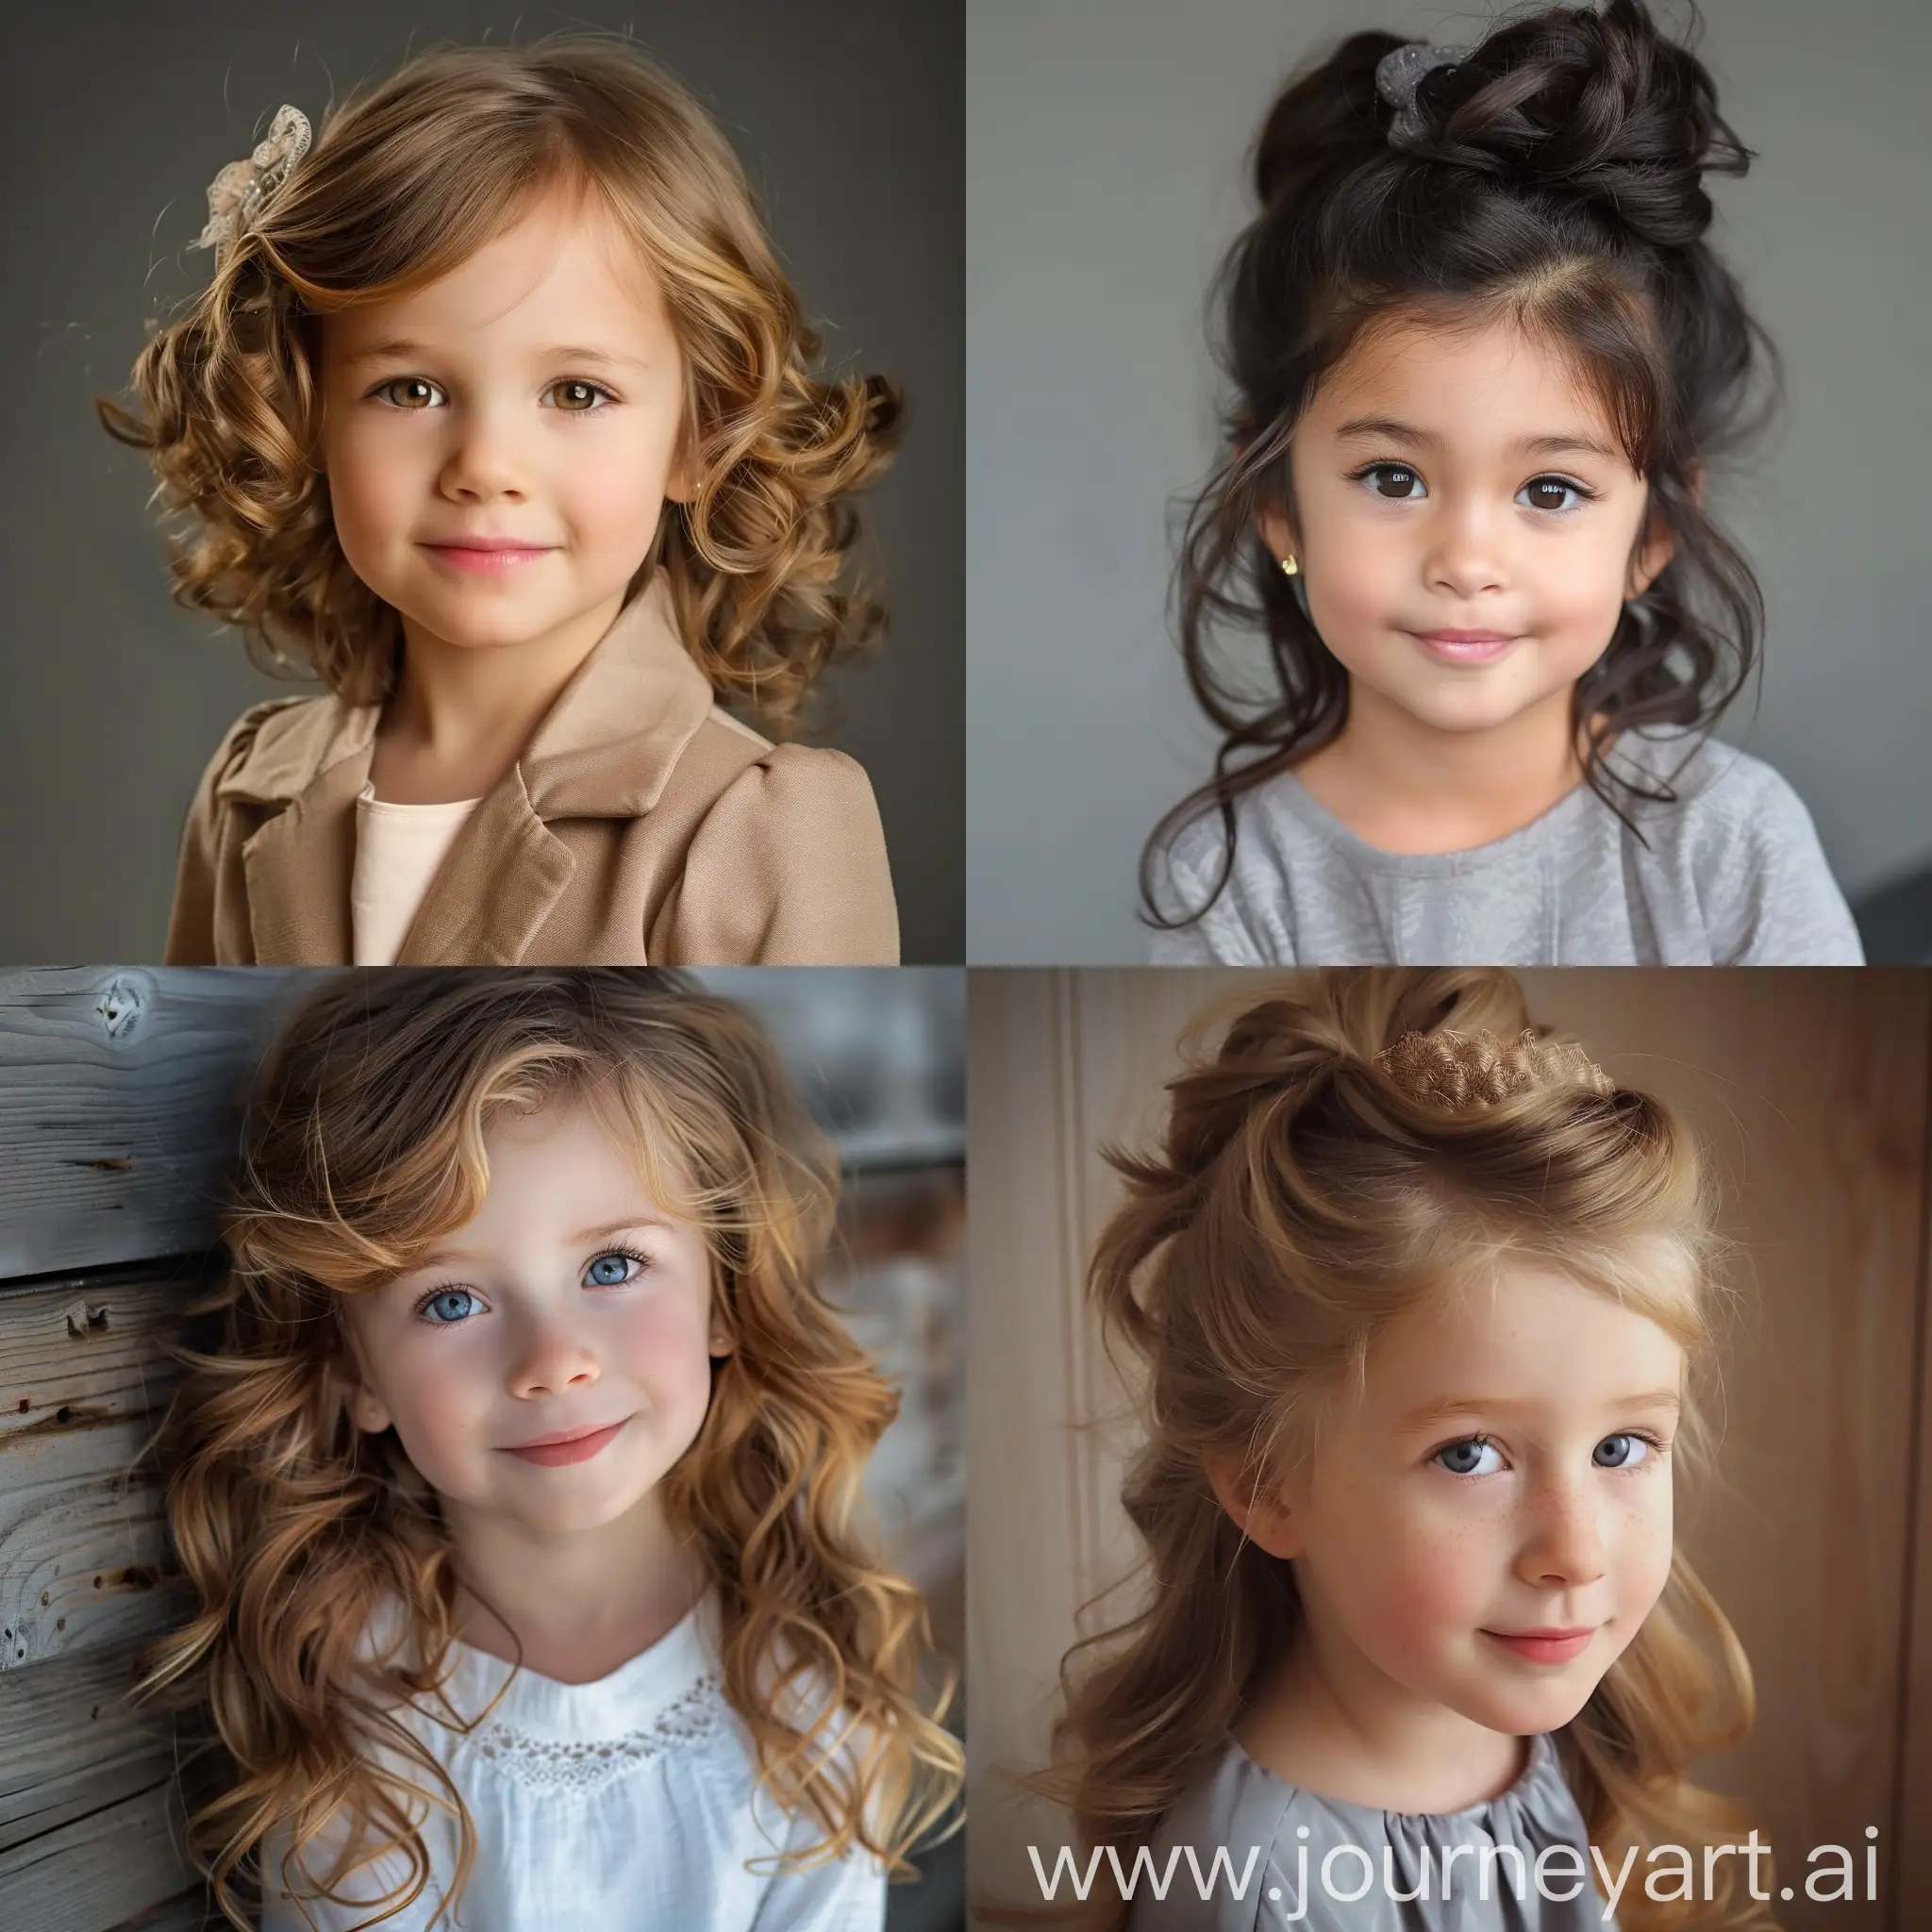 Adorable-Girl-with-Beautiful-Hair